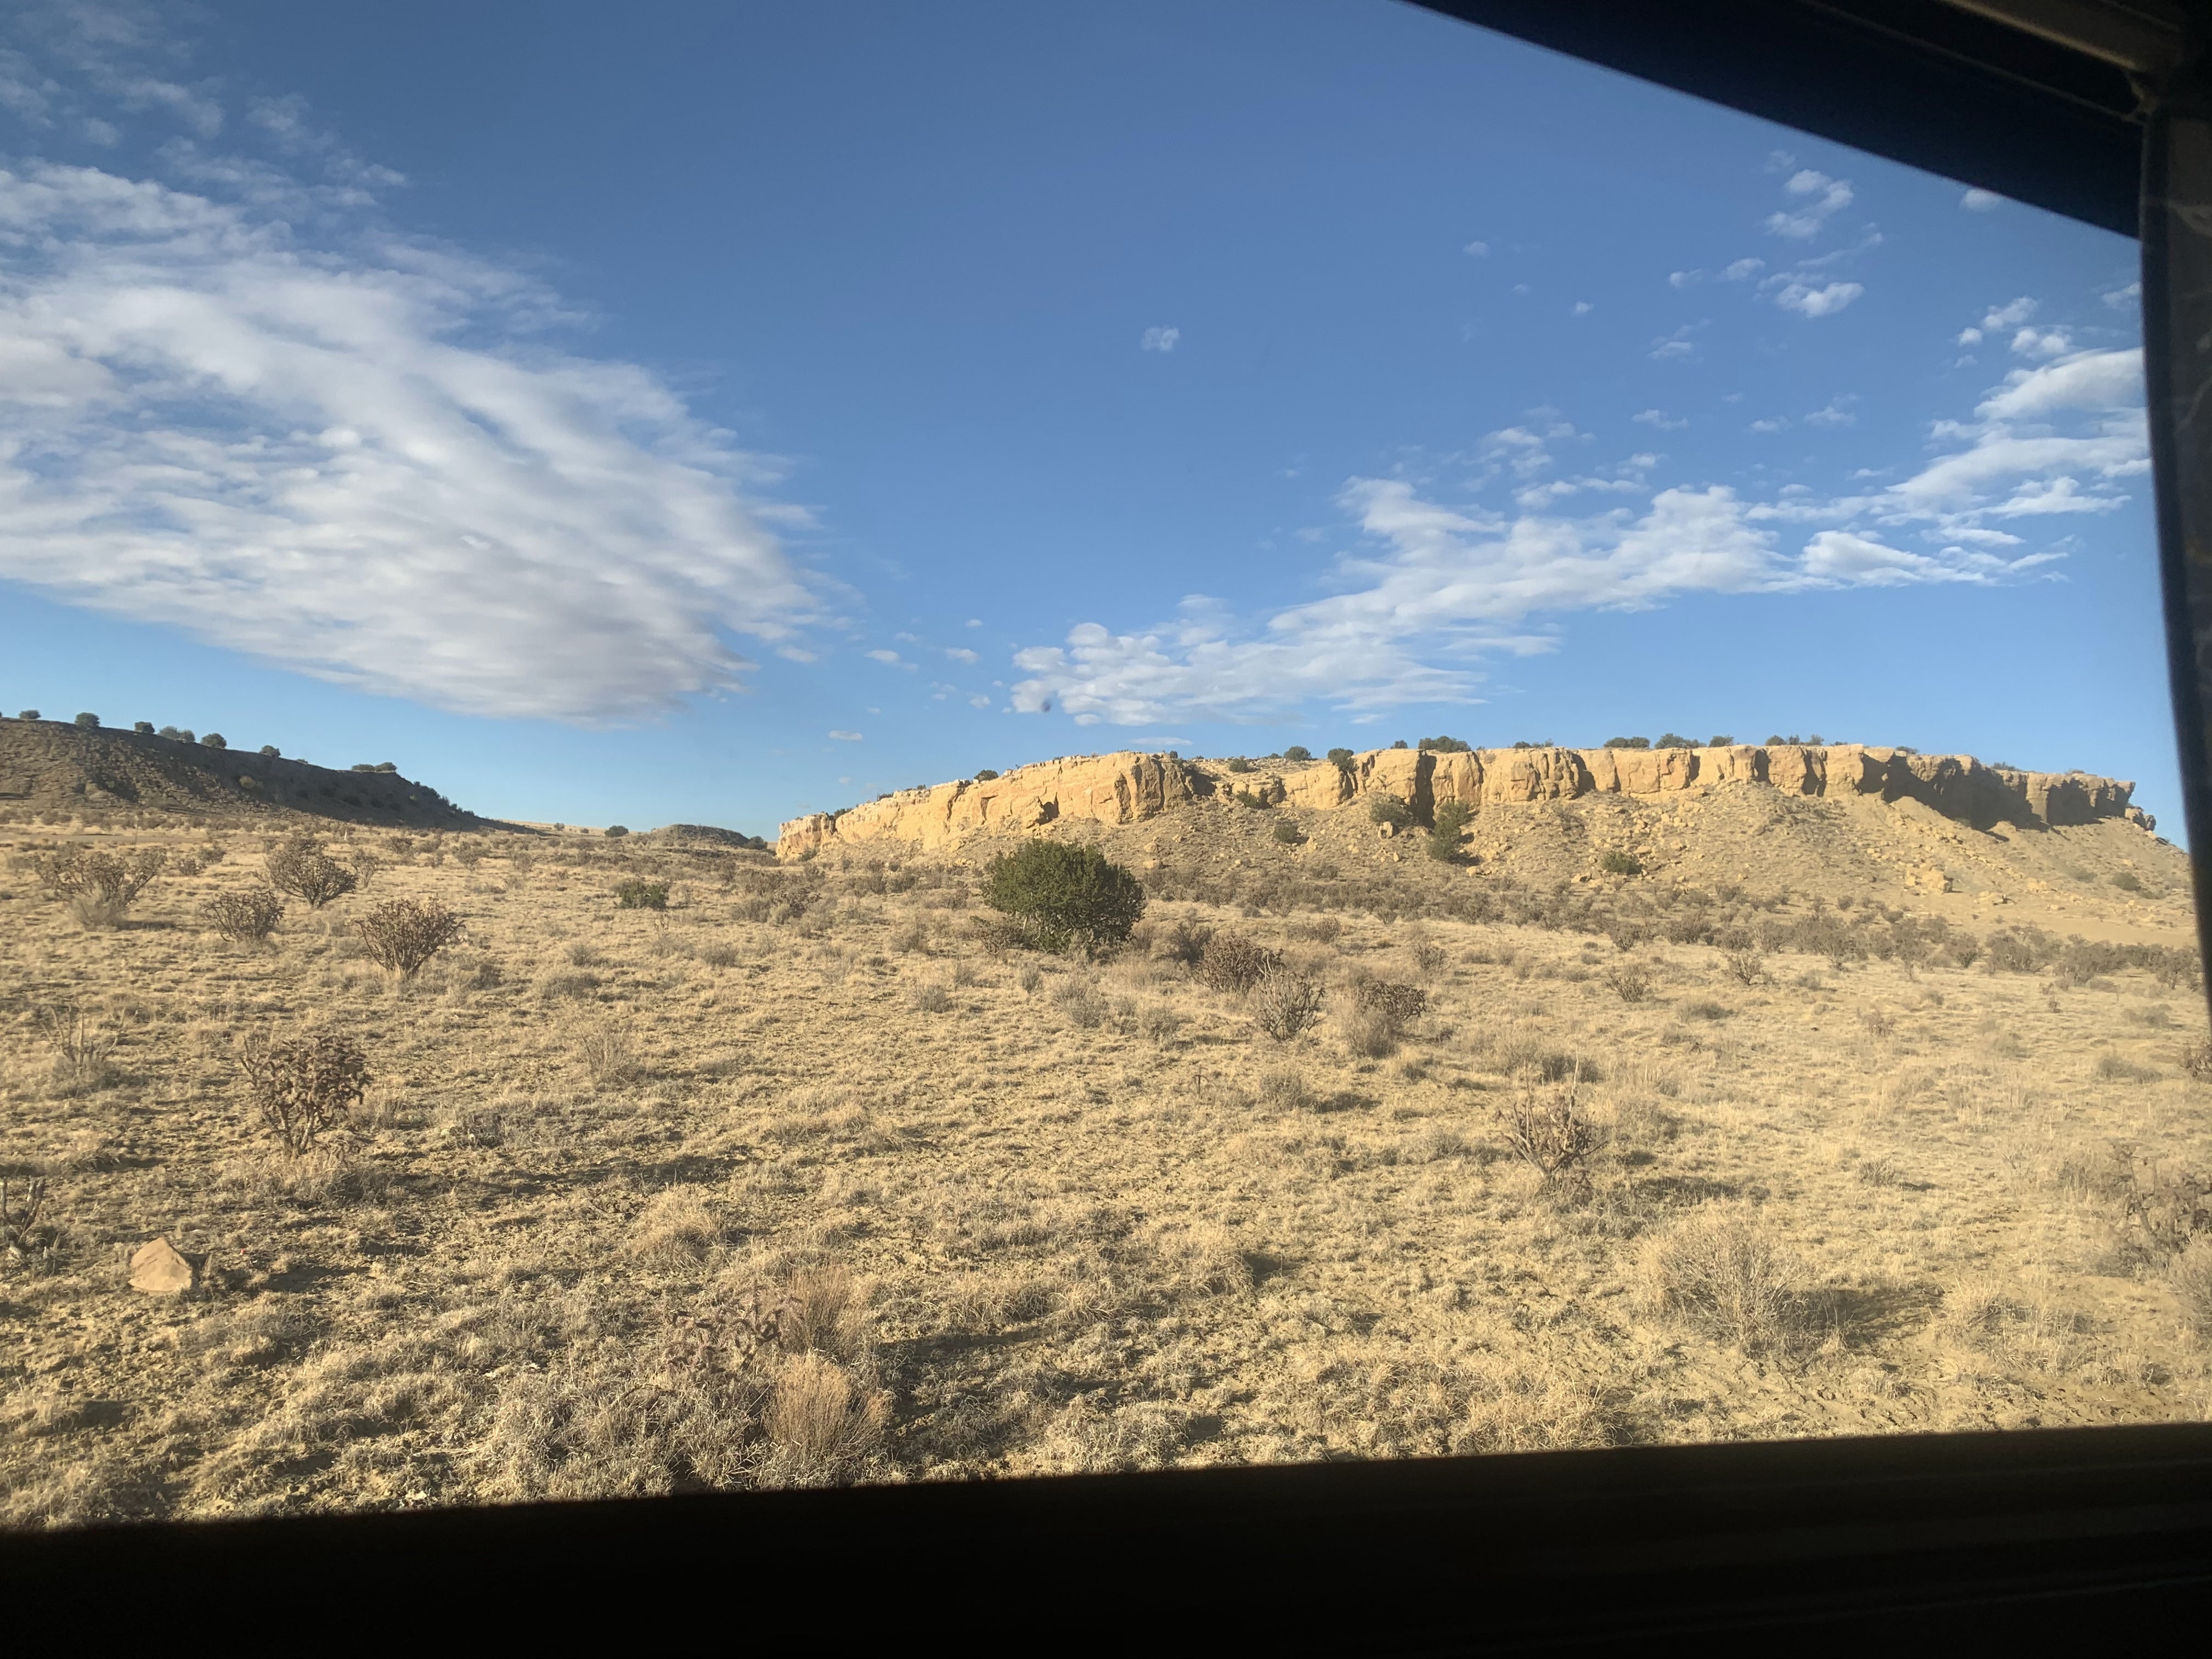 Camper submitted image from BLM dispersed camping / Zia Pueblo - 1